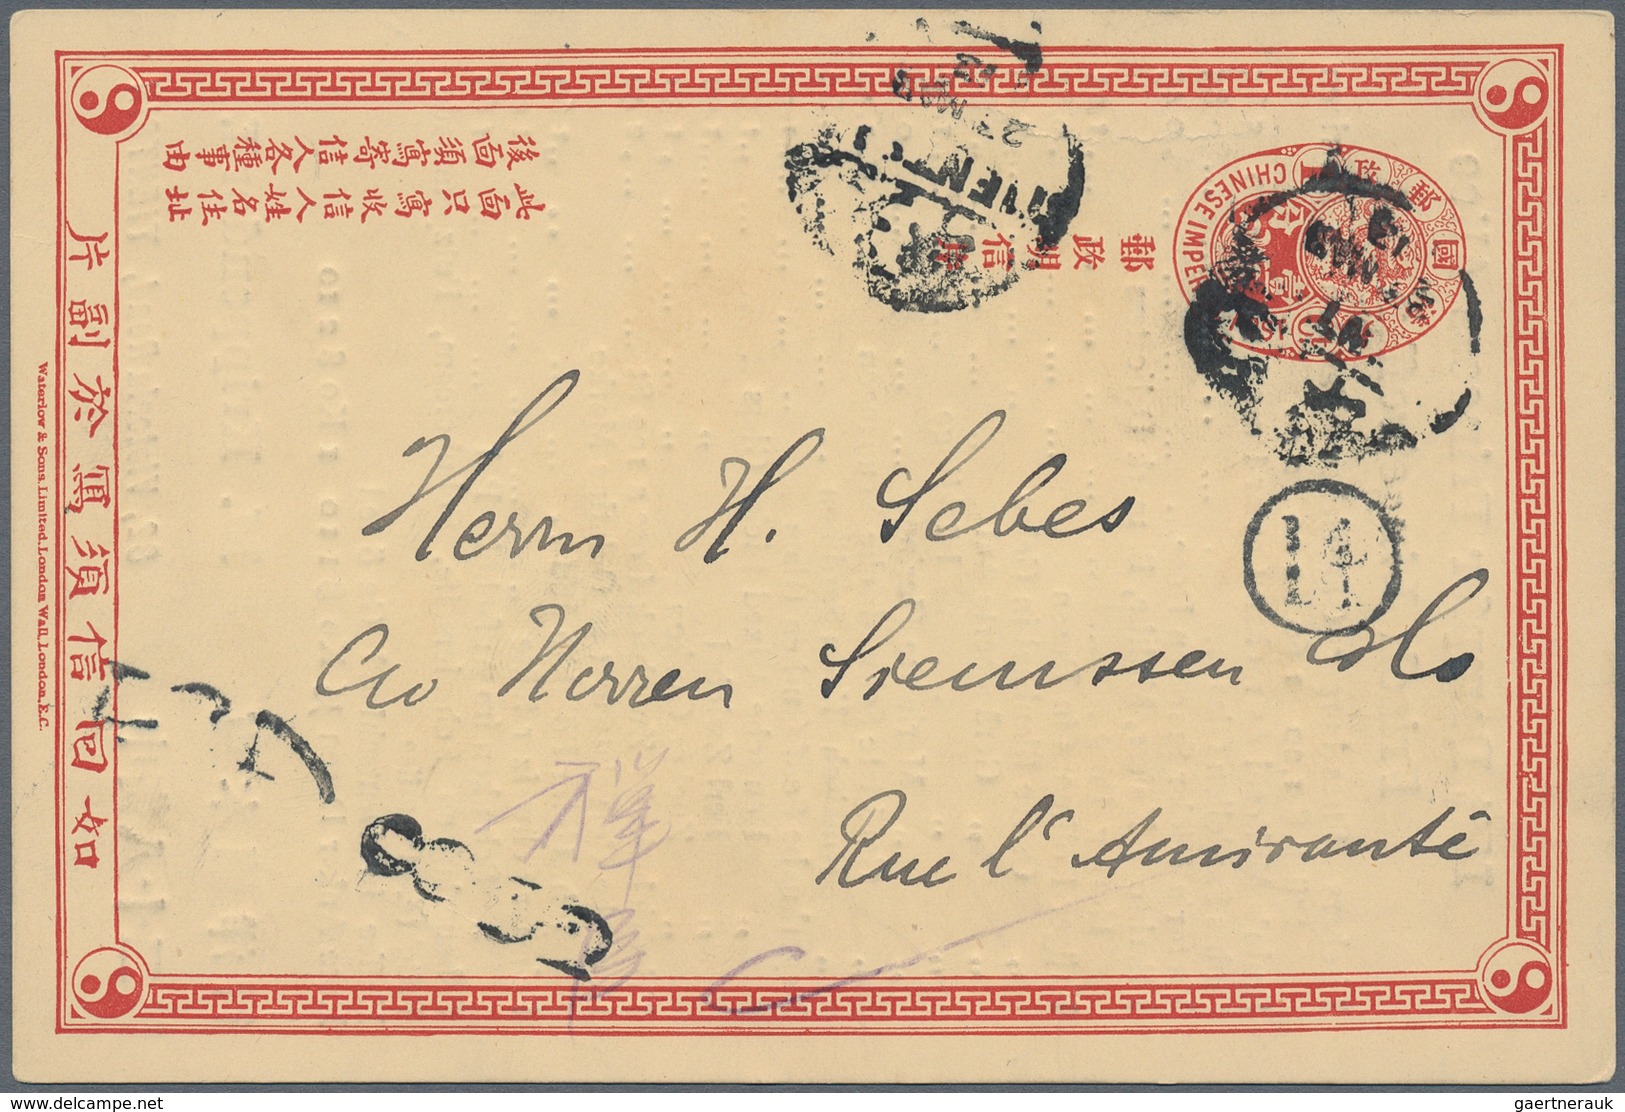 China - Ganzsachen: 1898, Card CIP 1 C., Question Part Of Double Card, Canc. "TIENTSIN 24 MAY 13" Us - Postales